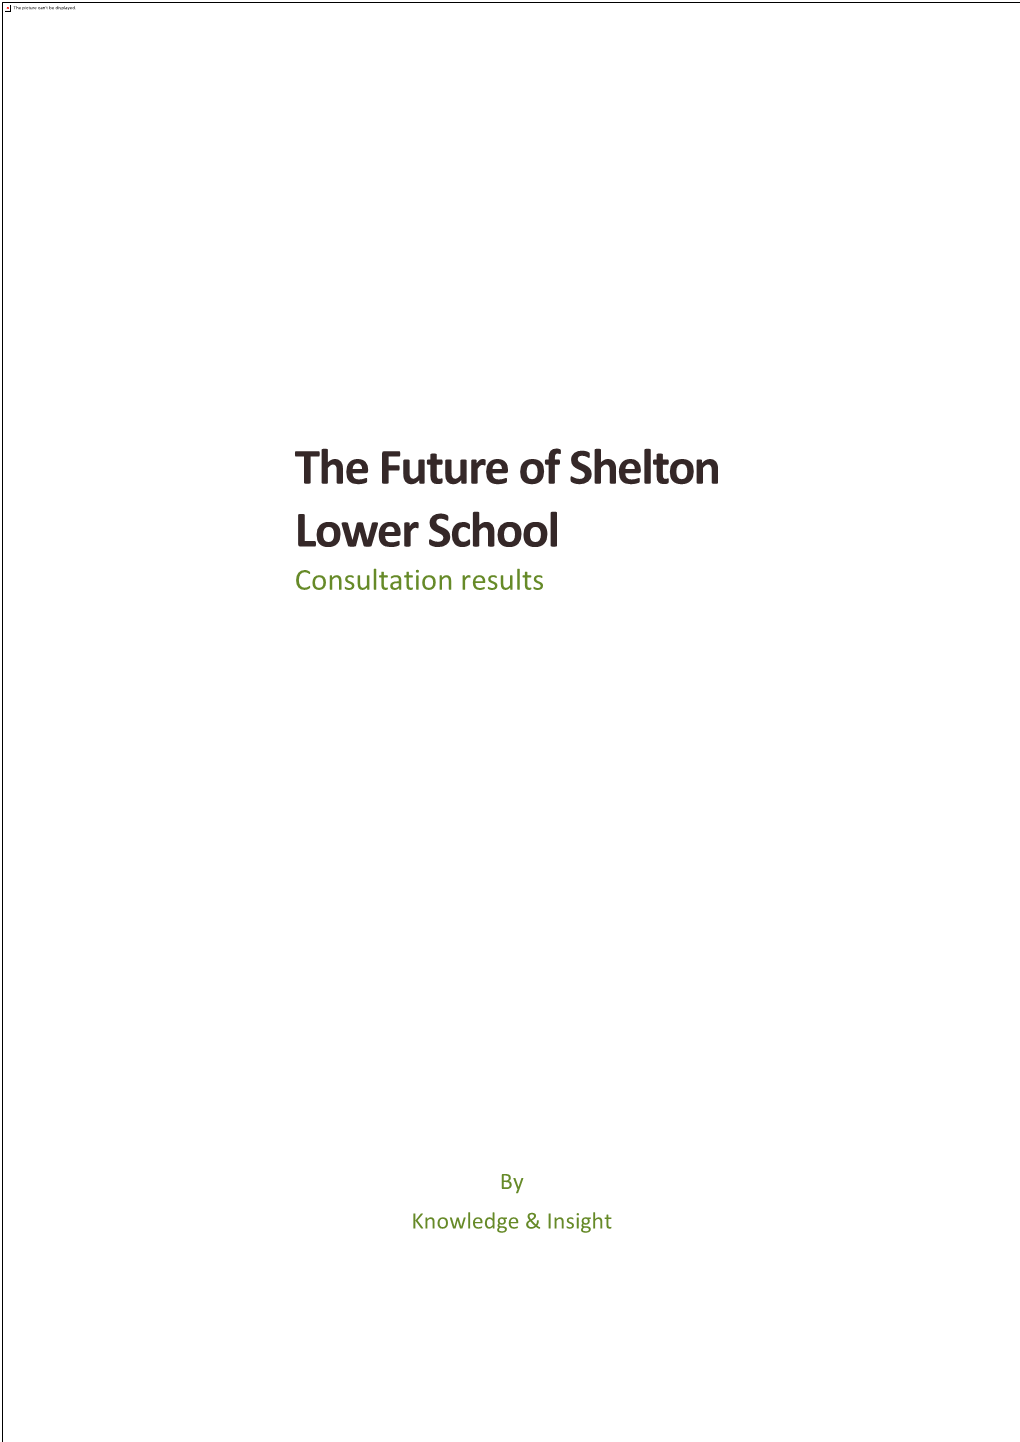 The Future of Shelton Lower School Consultation Results